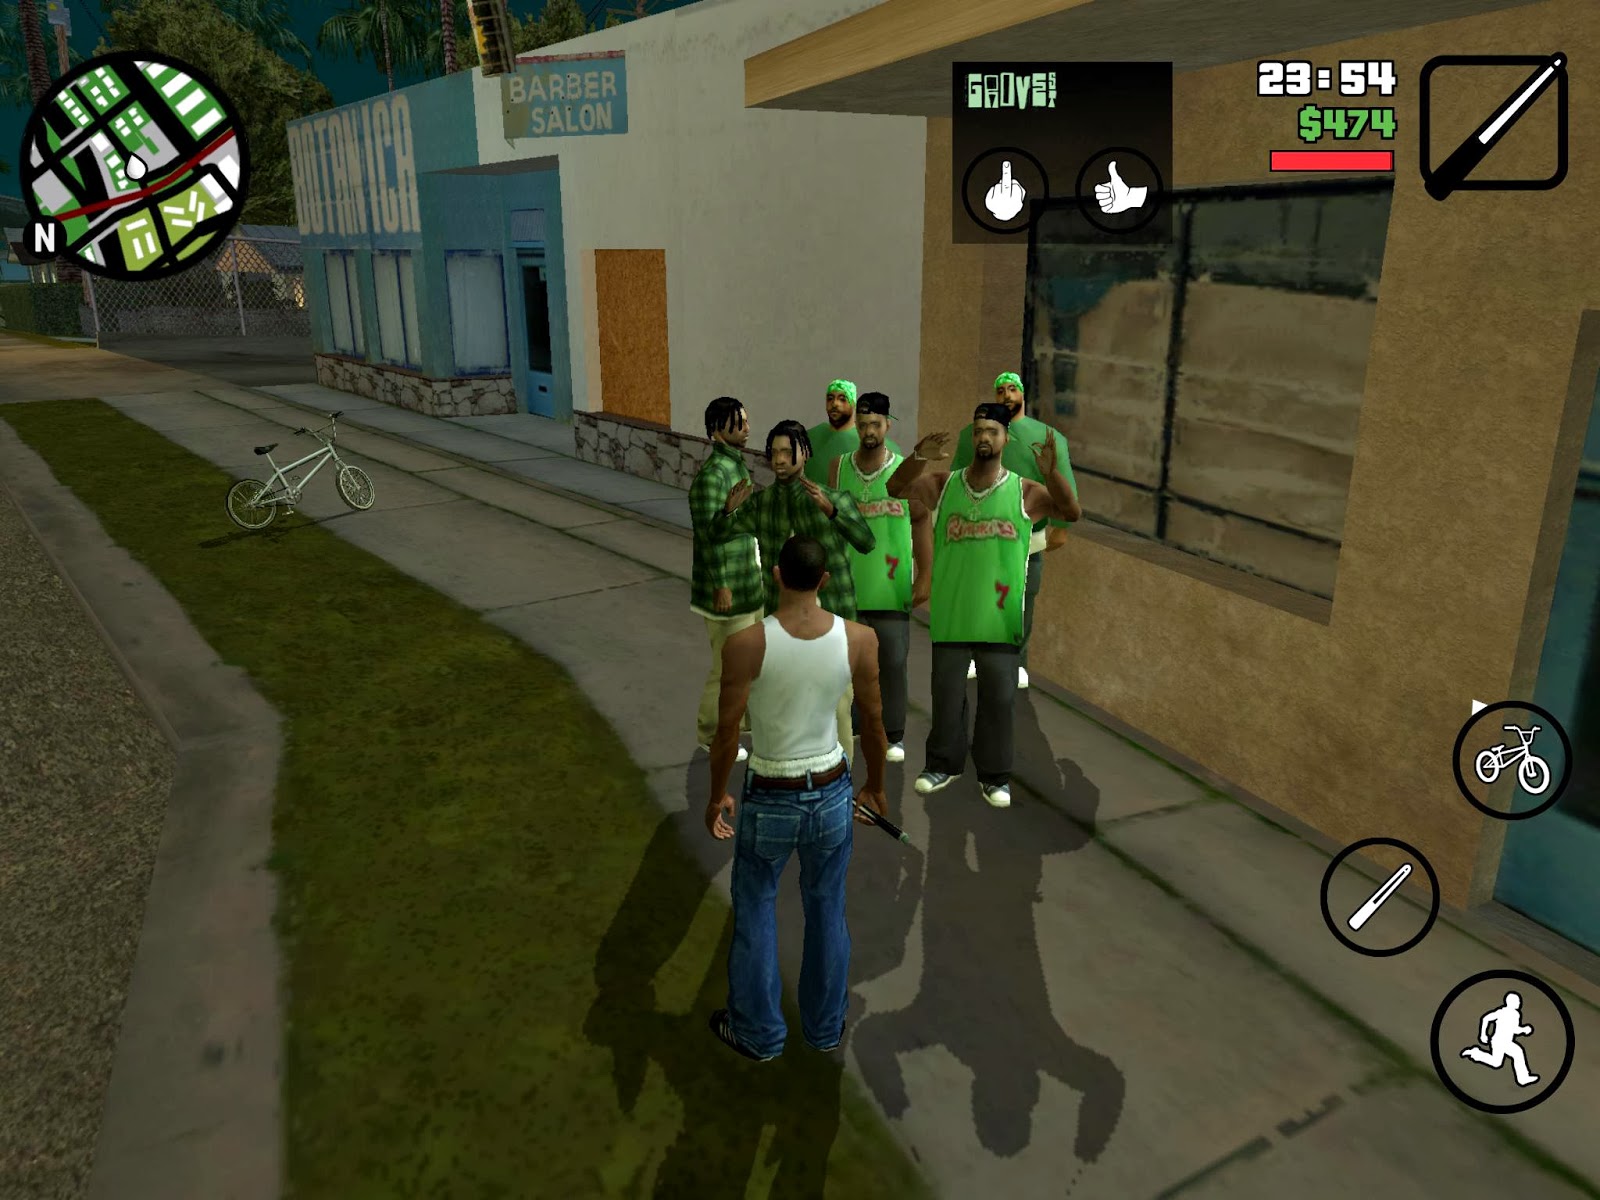 Grand Theft Auto San Andreas APK + DATA FILES Android Game ...